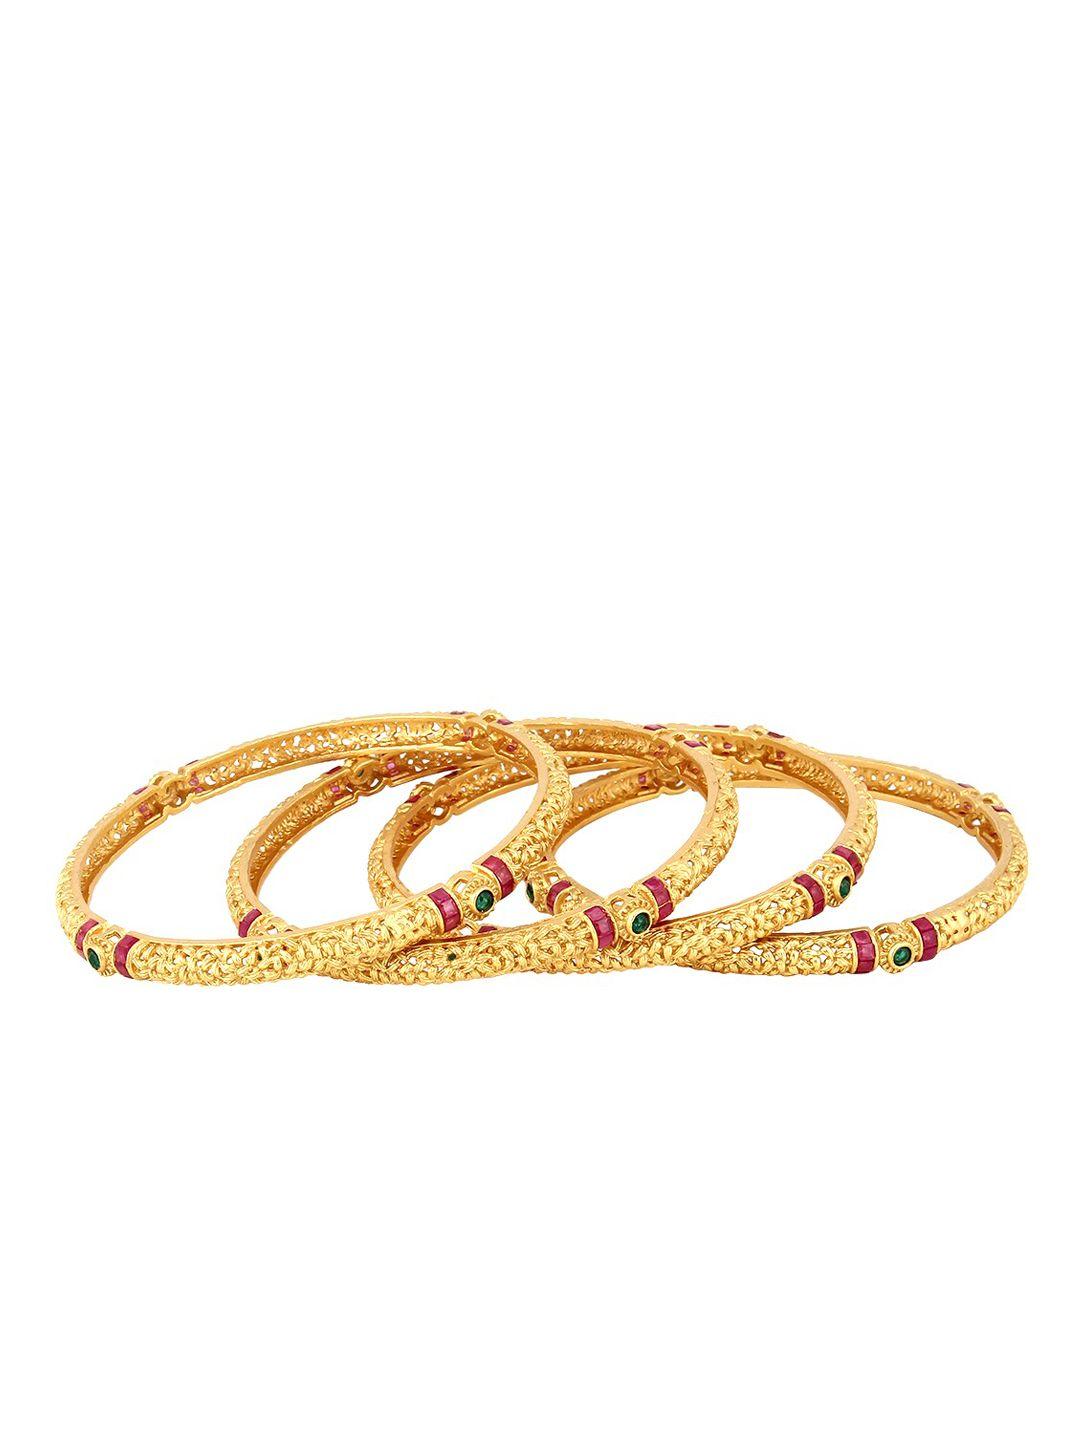 adwitiya collection set of 4 24k gold-plated red & green stone-studded handcrafted bangles